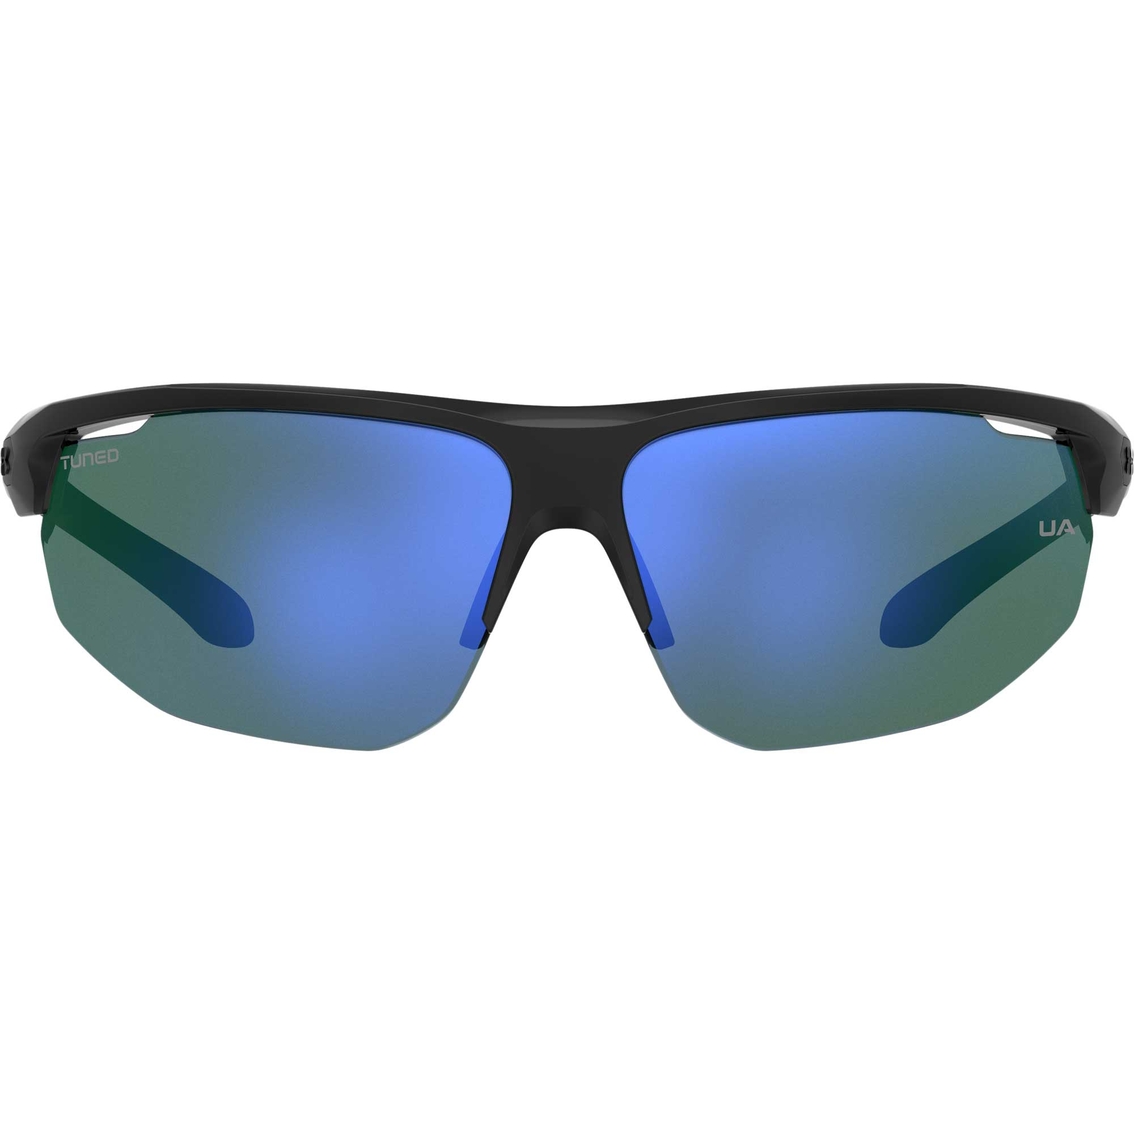 Under Armour Sunglasses 0002GS - Image 2 of 3